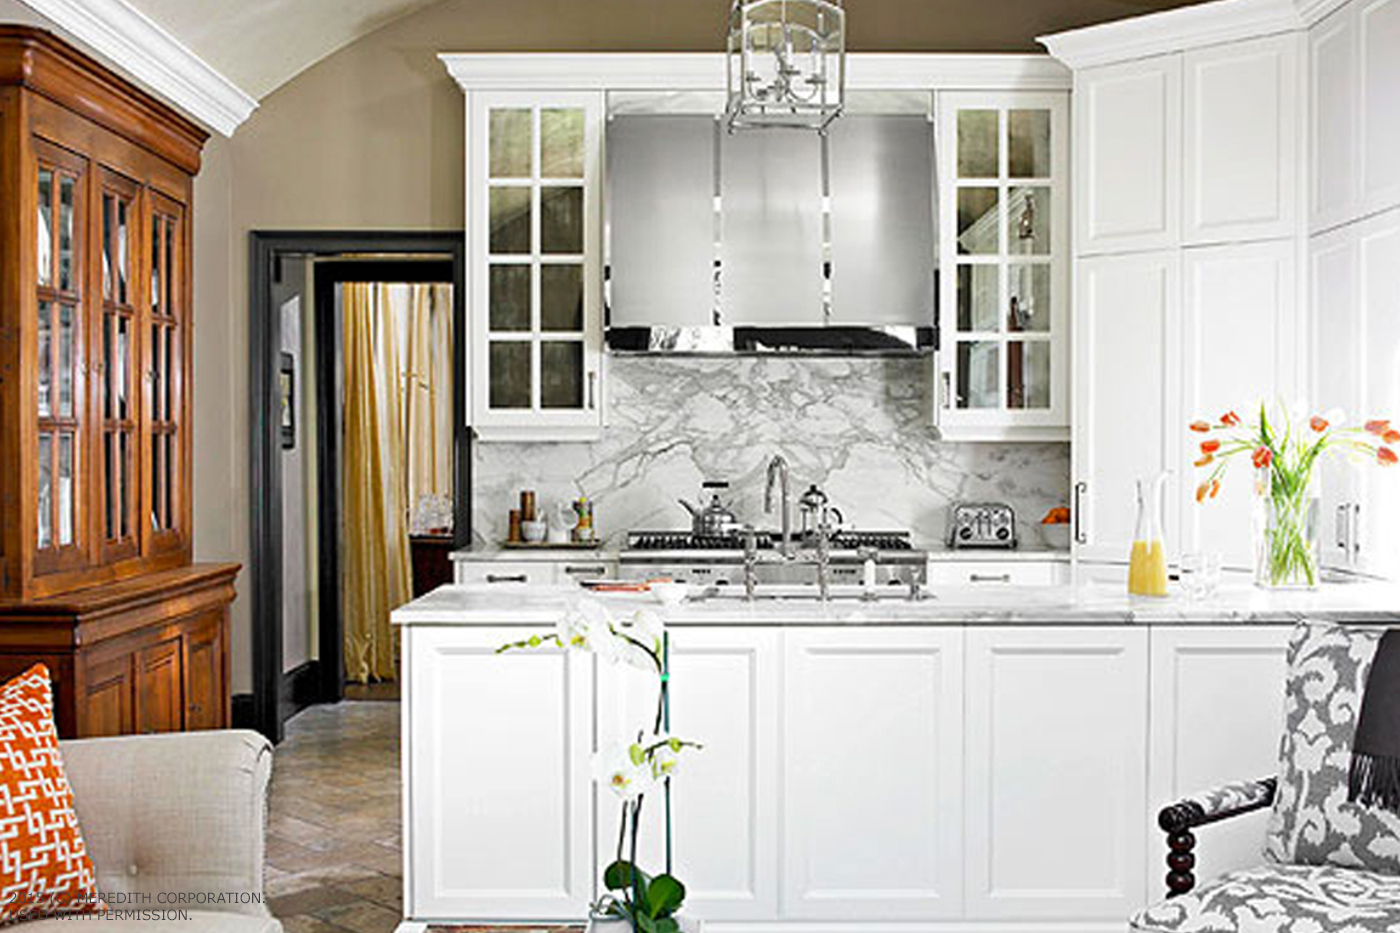 How to Impress with a Basic White Kitchen - bhgrelife.com